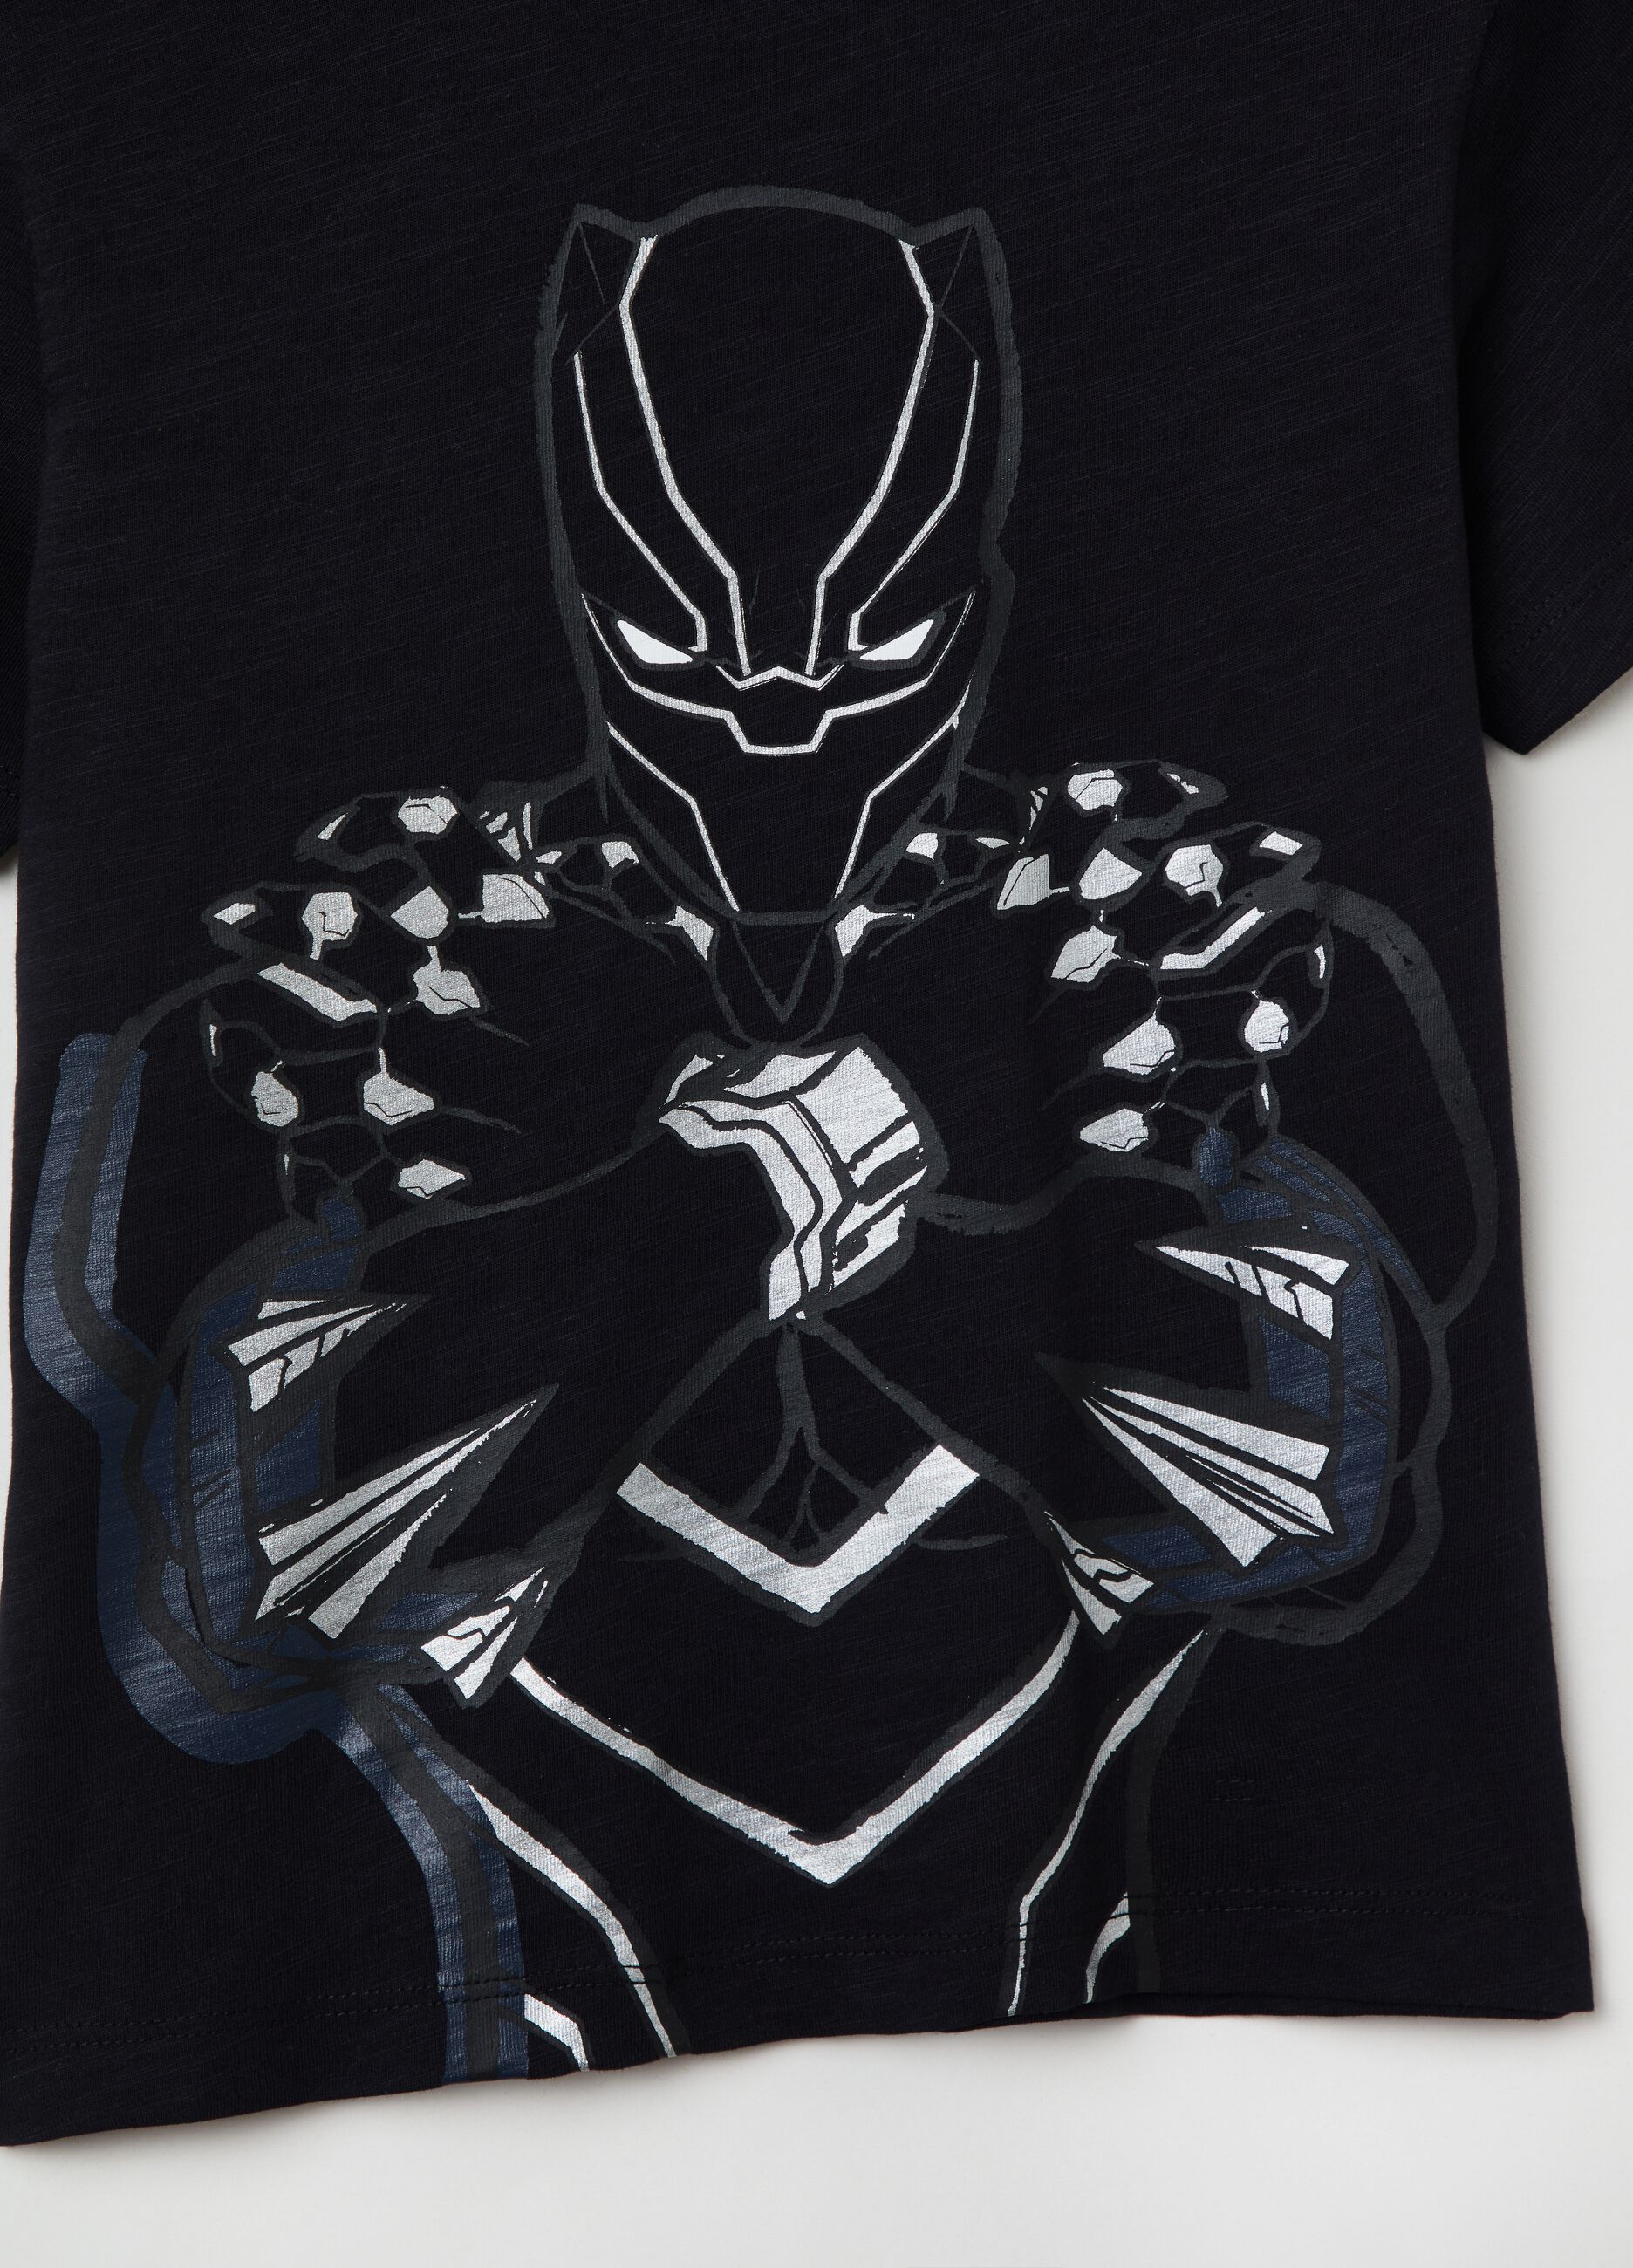 Cotton T-shirt with Marvel Black Panther print